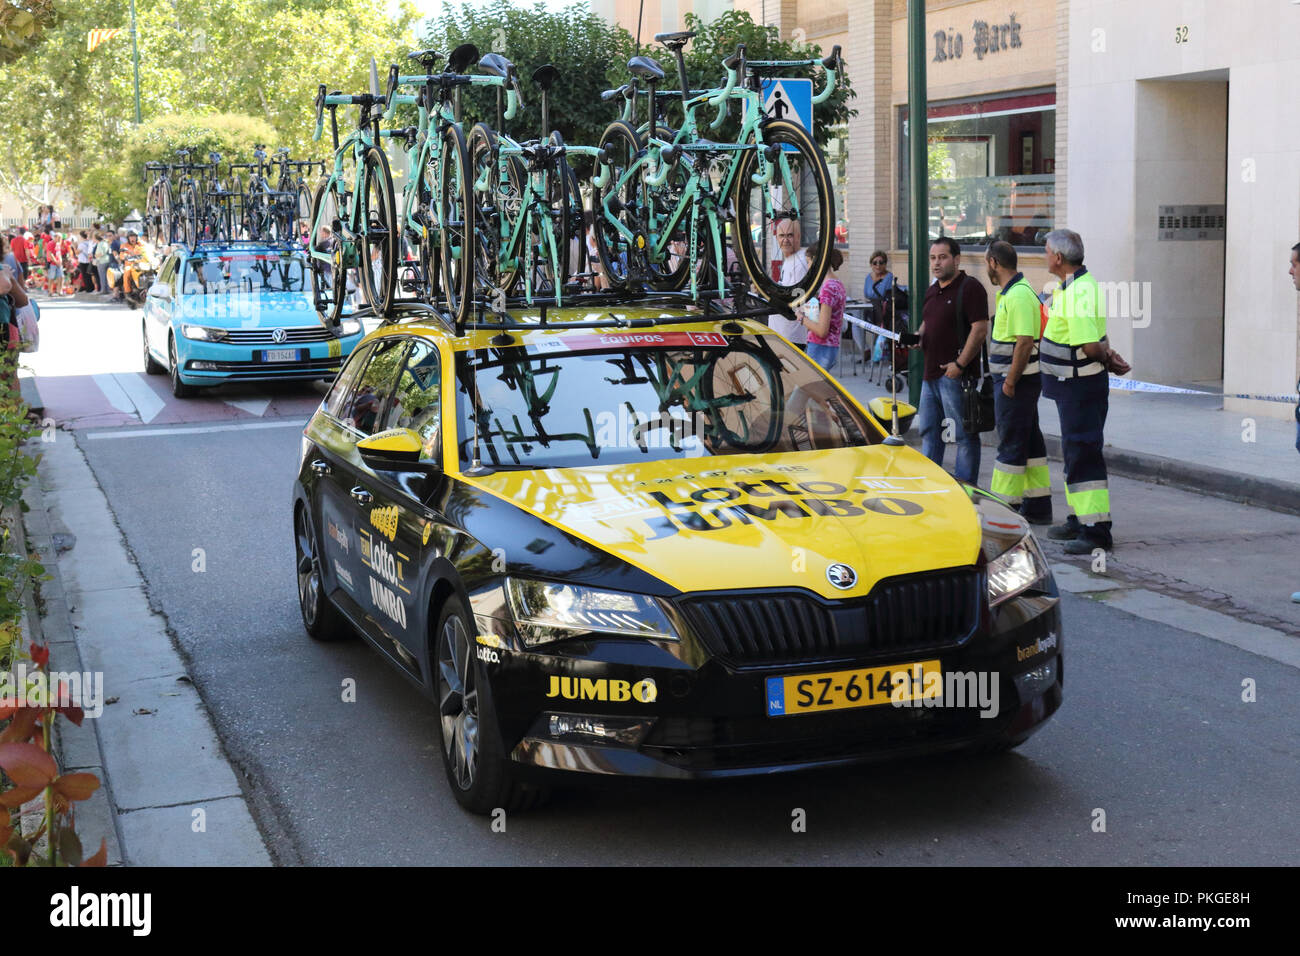 Ejea de los Caballeros, Spain. 13th Sep, 2018. The LOTTO SOUDAL team cars parked at the start of the Vuelta, with bicycles on the baggage rack.. Isacco Coccato/Alamy Live News Stock Photo